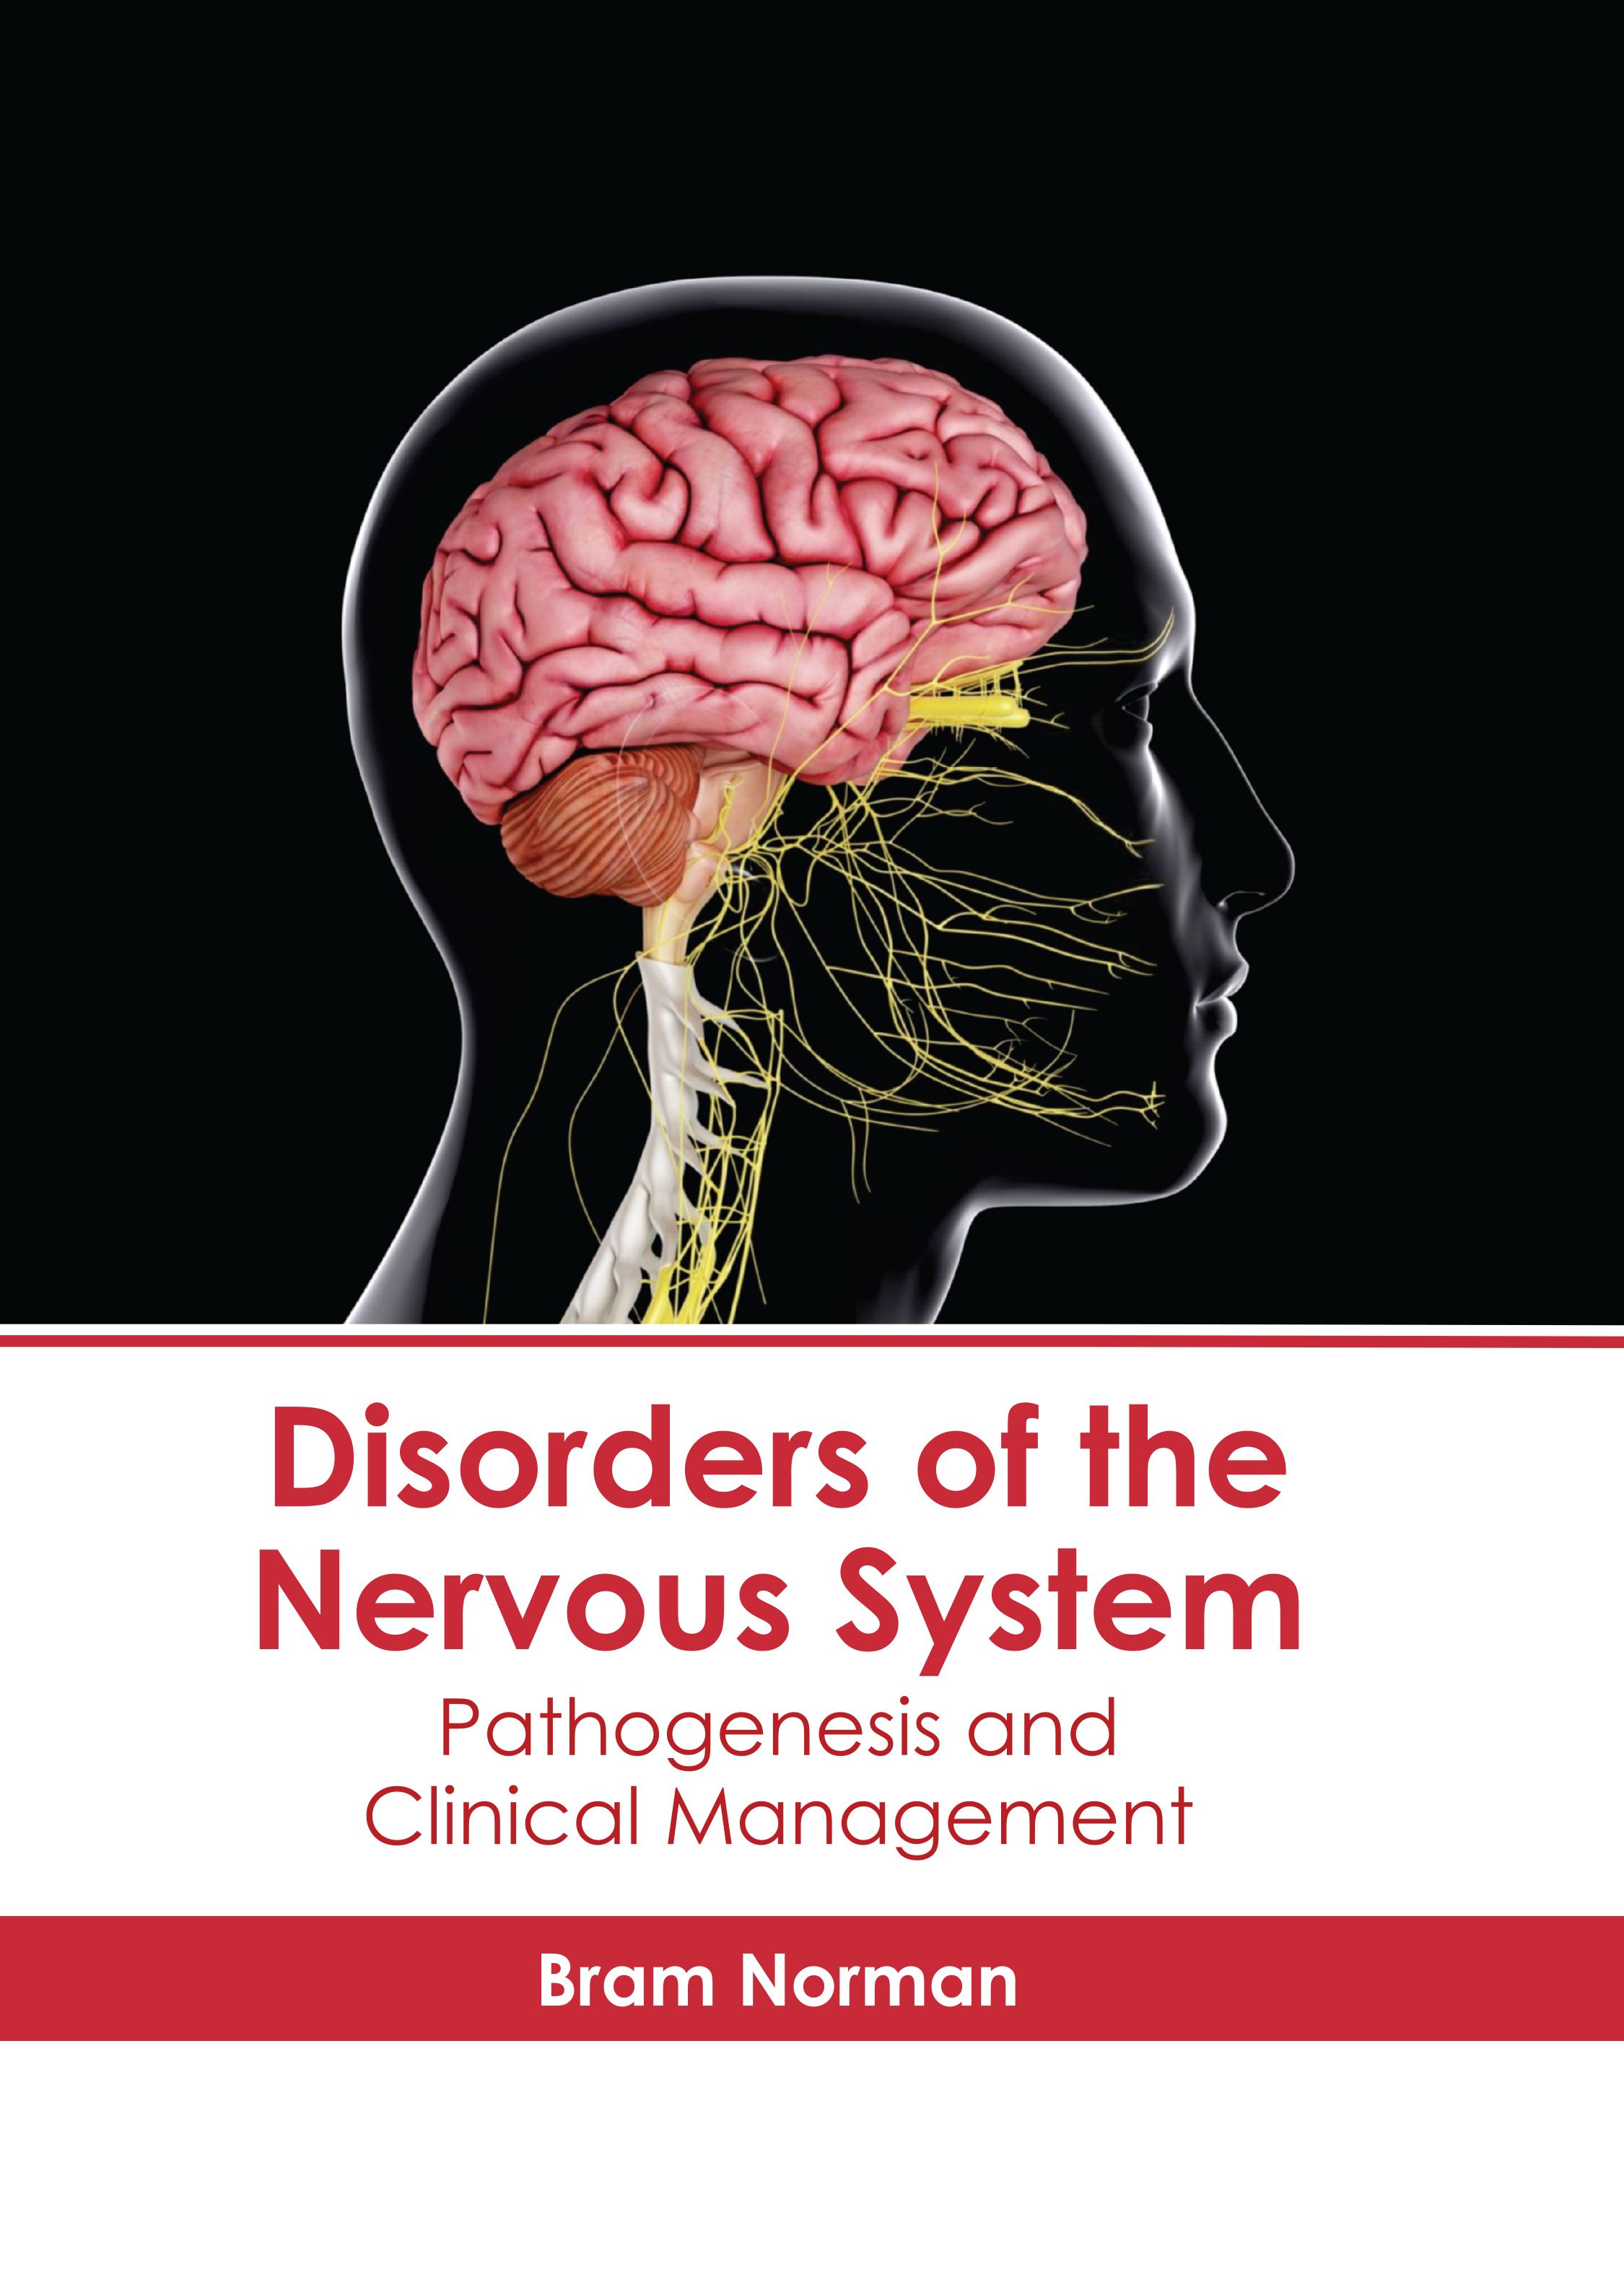 DISORDERS OF THE NERVOUS SYSTEM: PATHOGENESIS AND CLINICAL MANAGEMENT